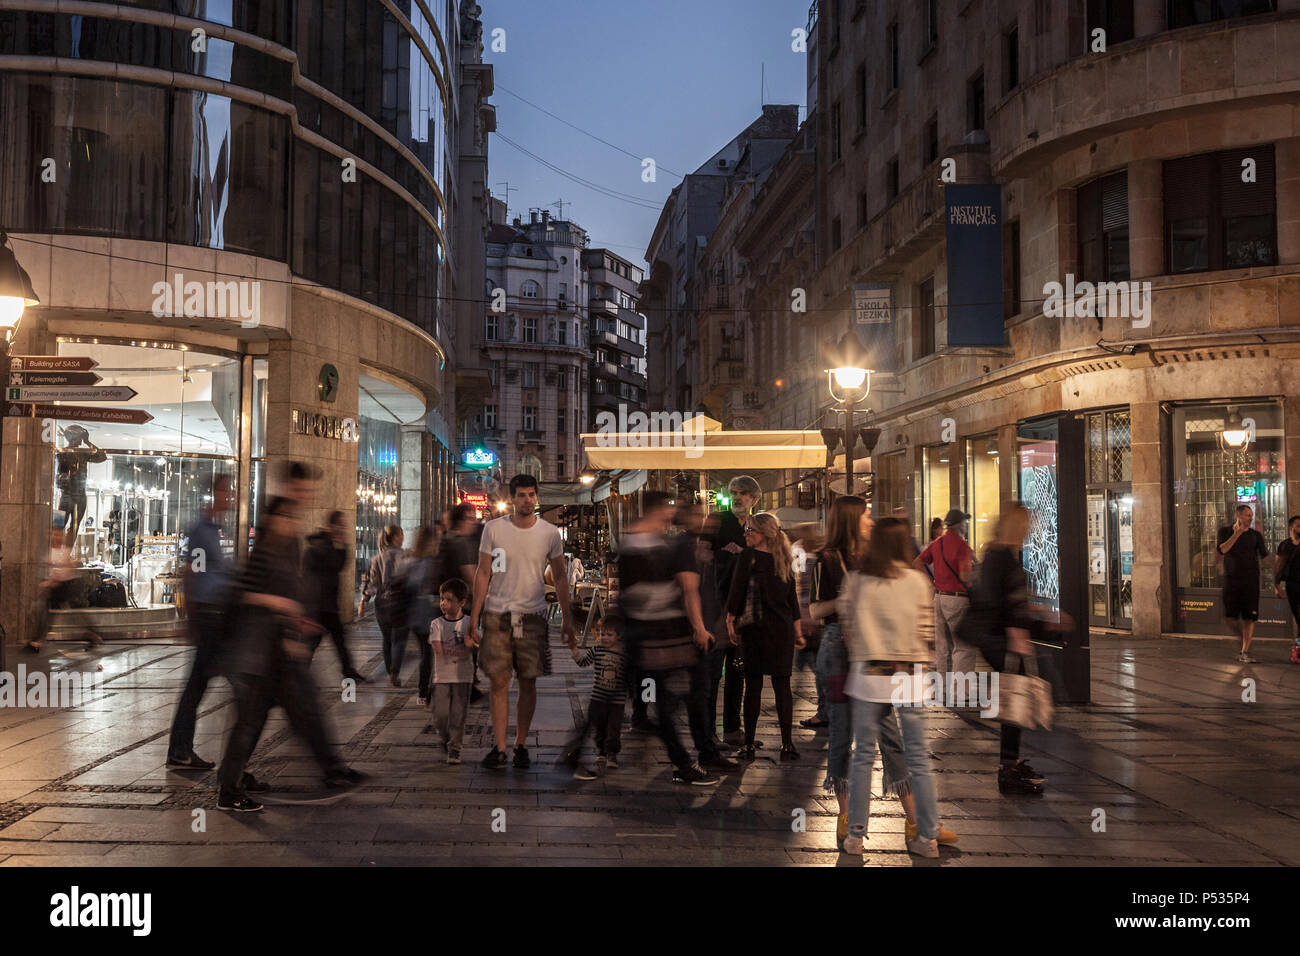 BELGRADE, SERBIA - APRIL 22, 2018: Kneza Mihailova street at night, crowded, with blurred people rushing. Also known as Knez Mihaila, this is the main Stock Photo